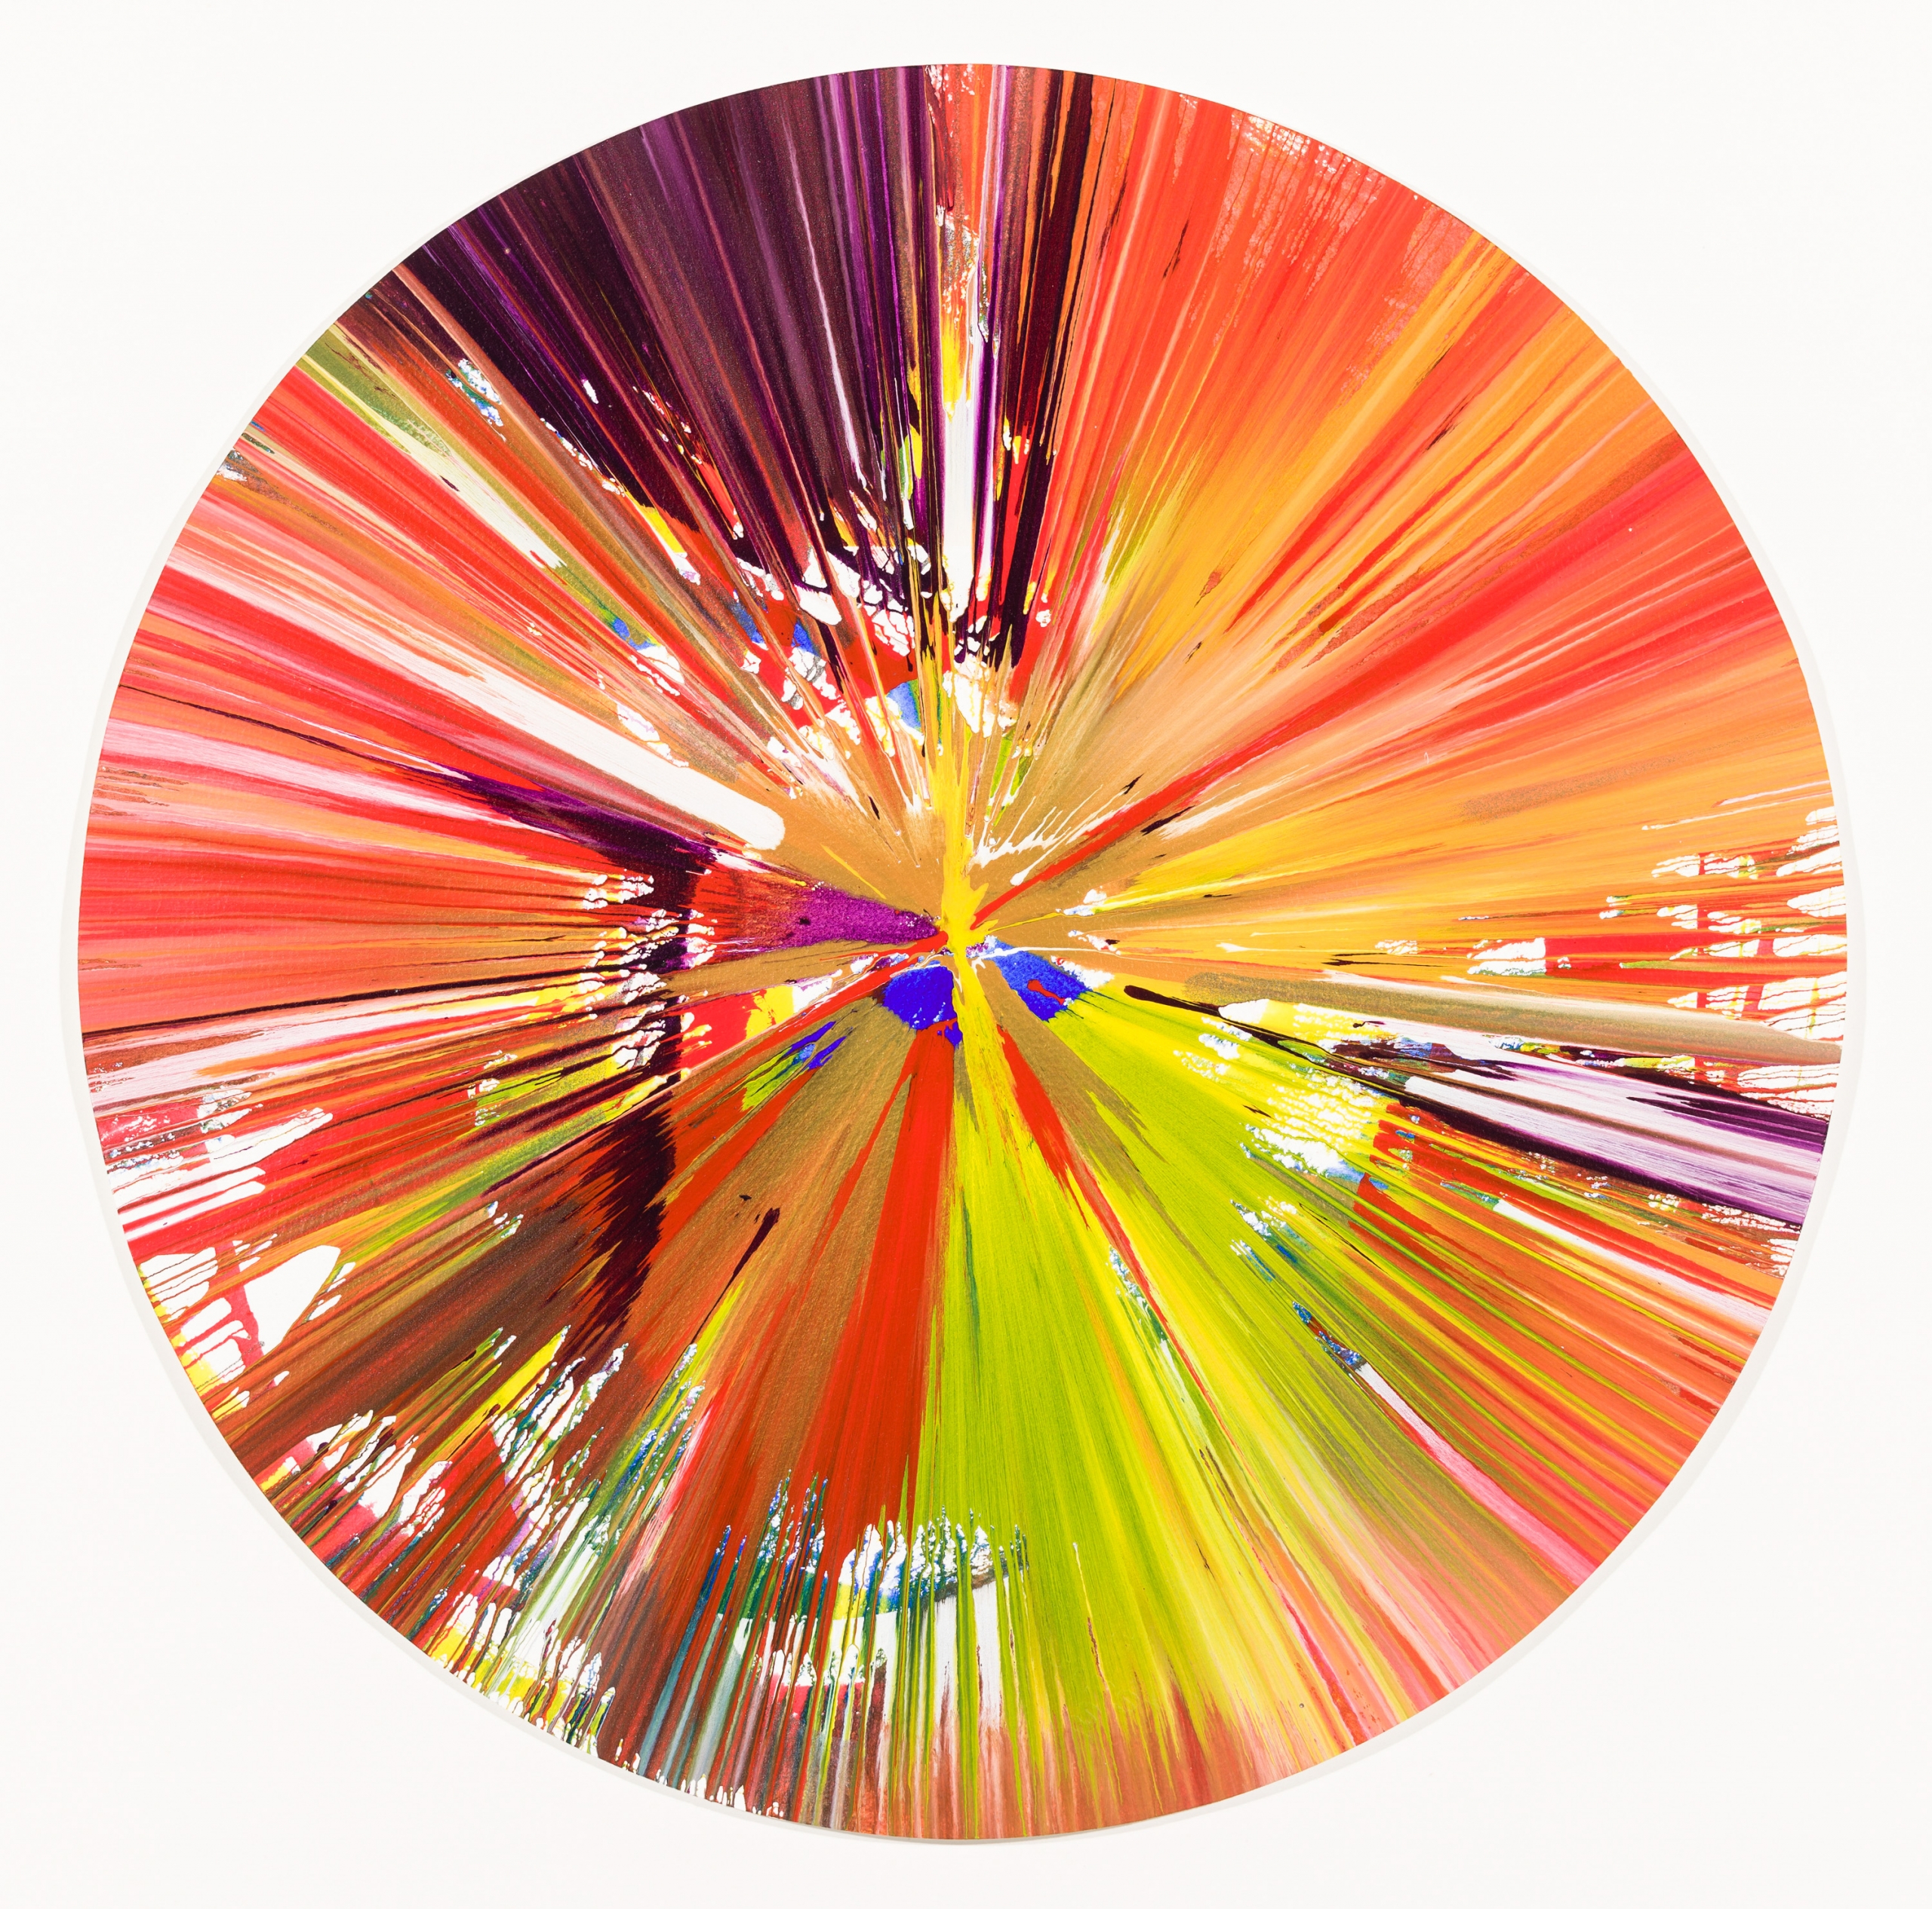 Damien Hirst, Spin Painting